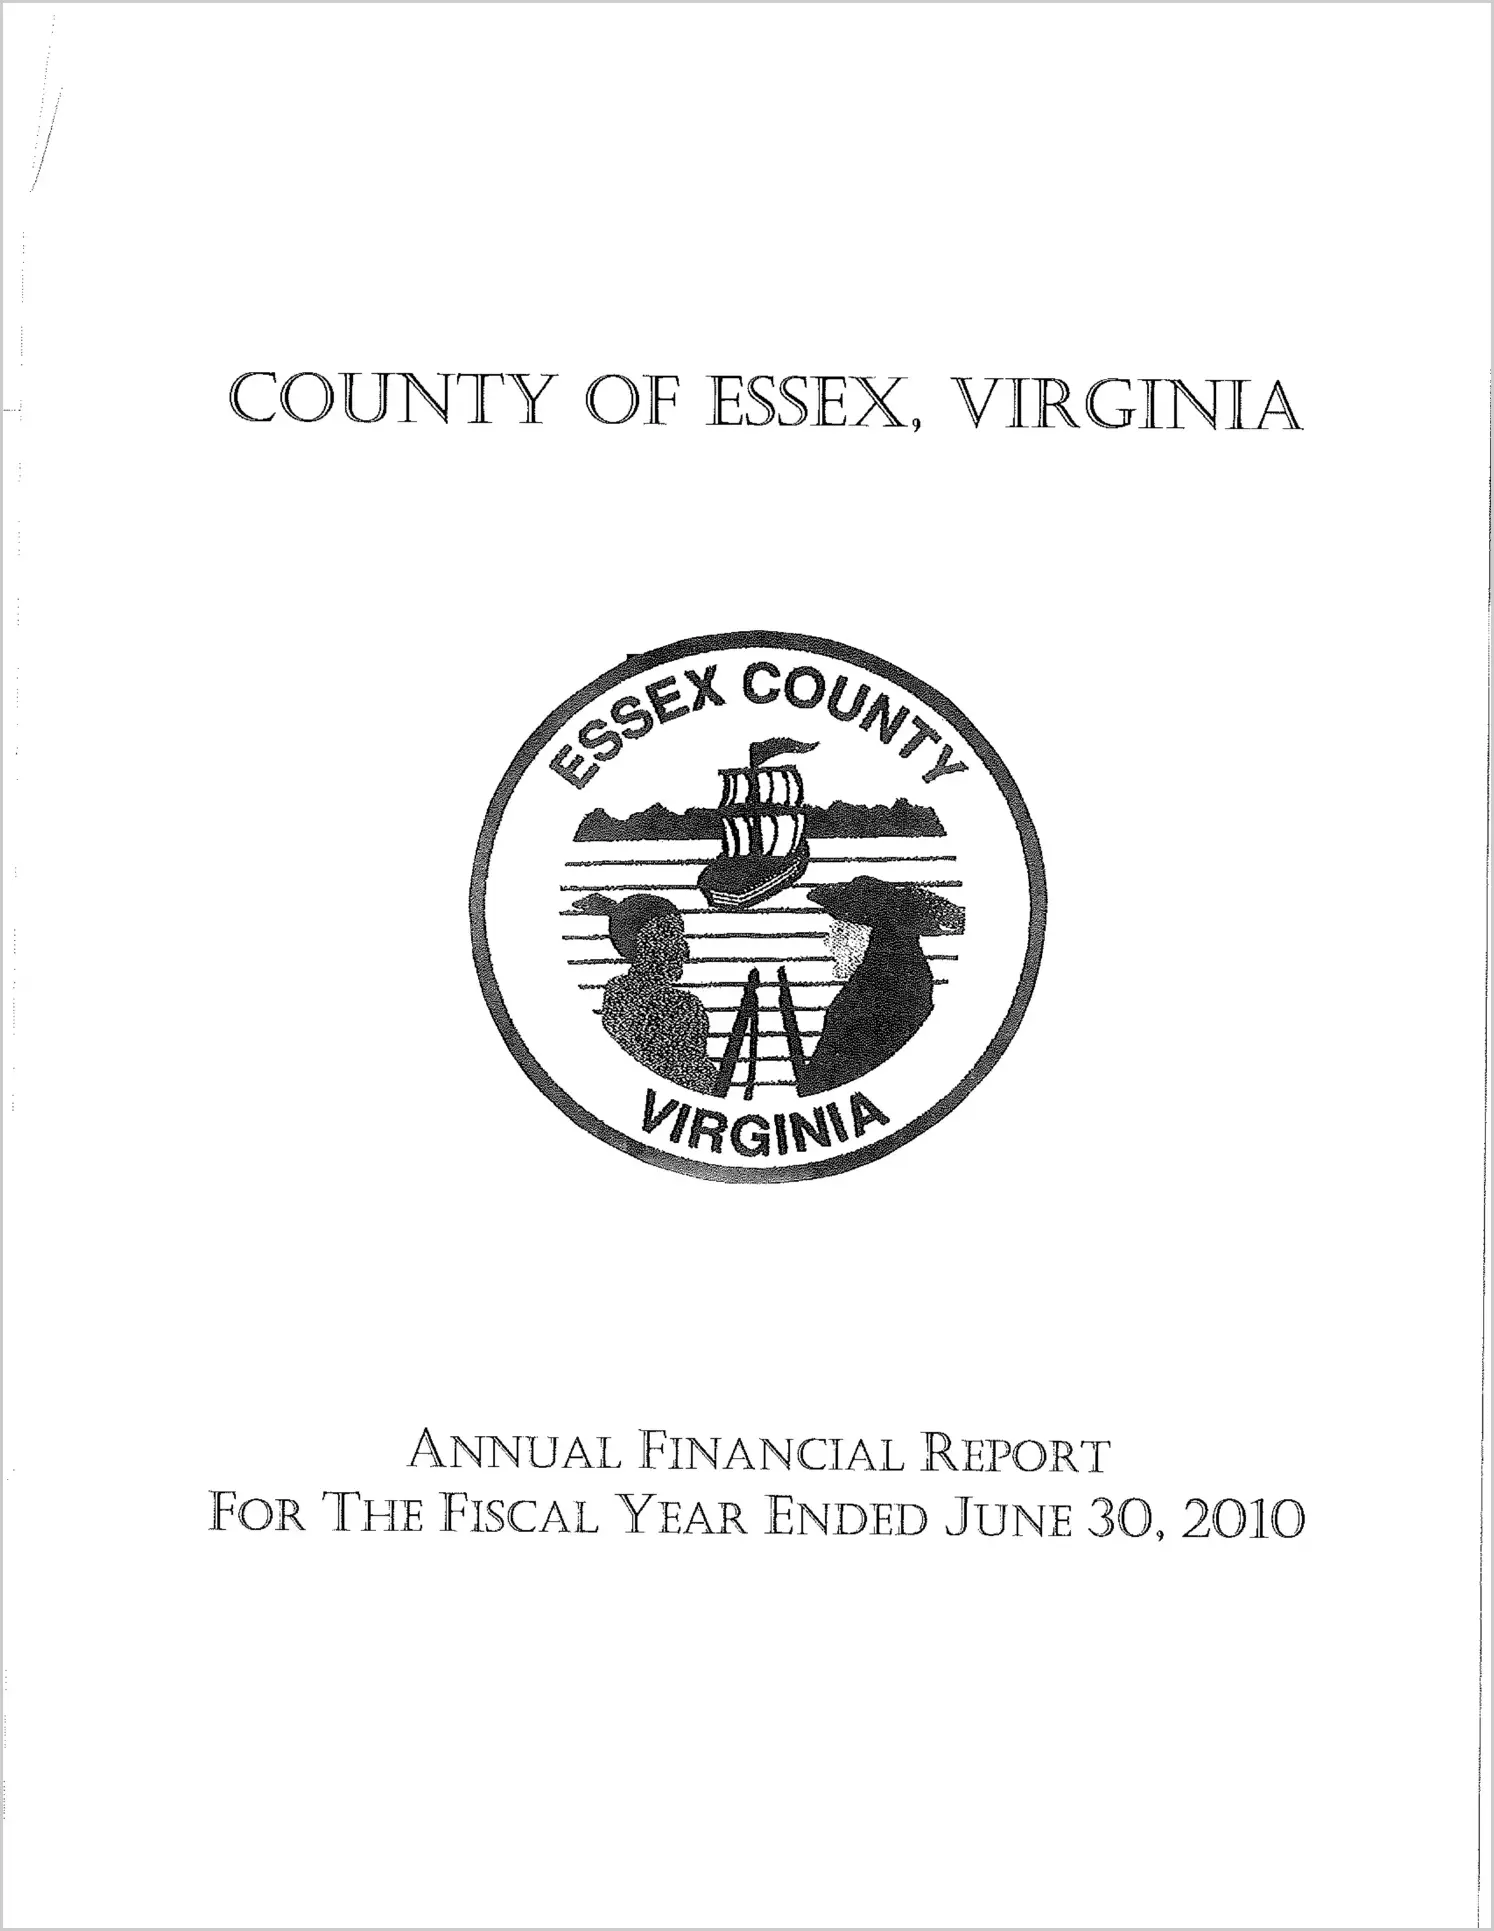 2010 Annual Financial Report for County of Essex